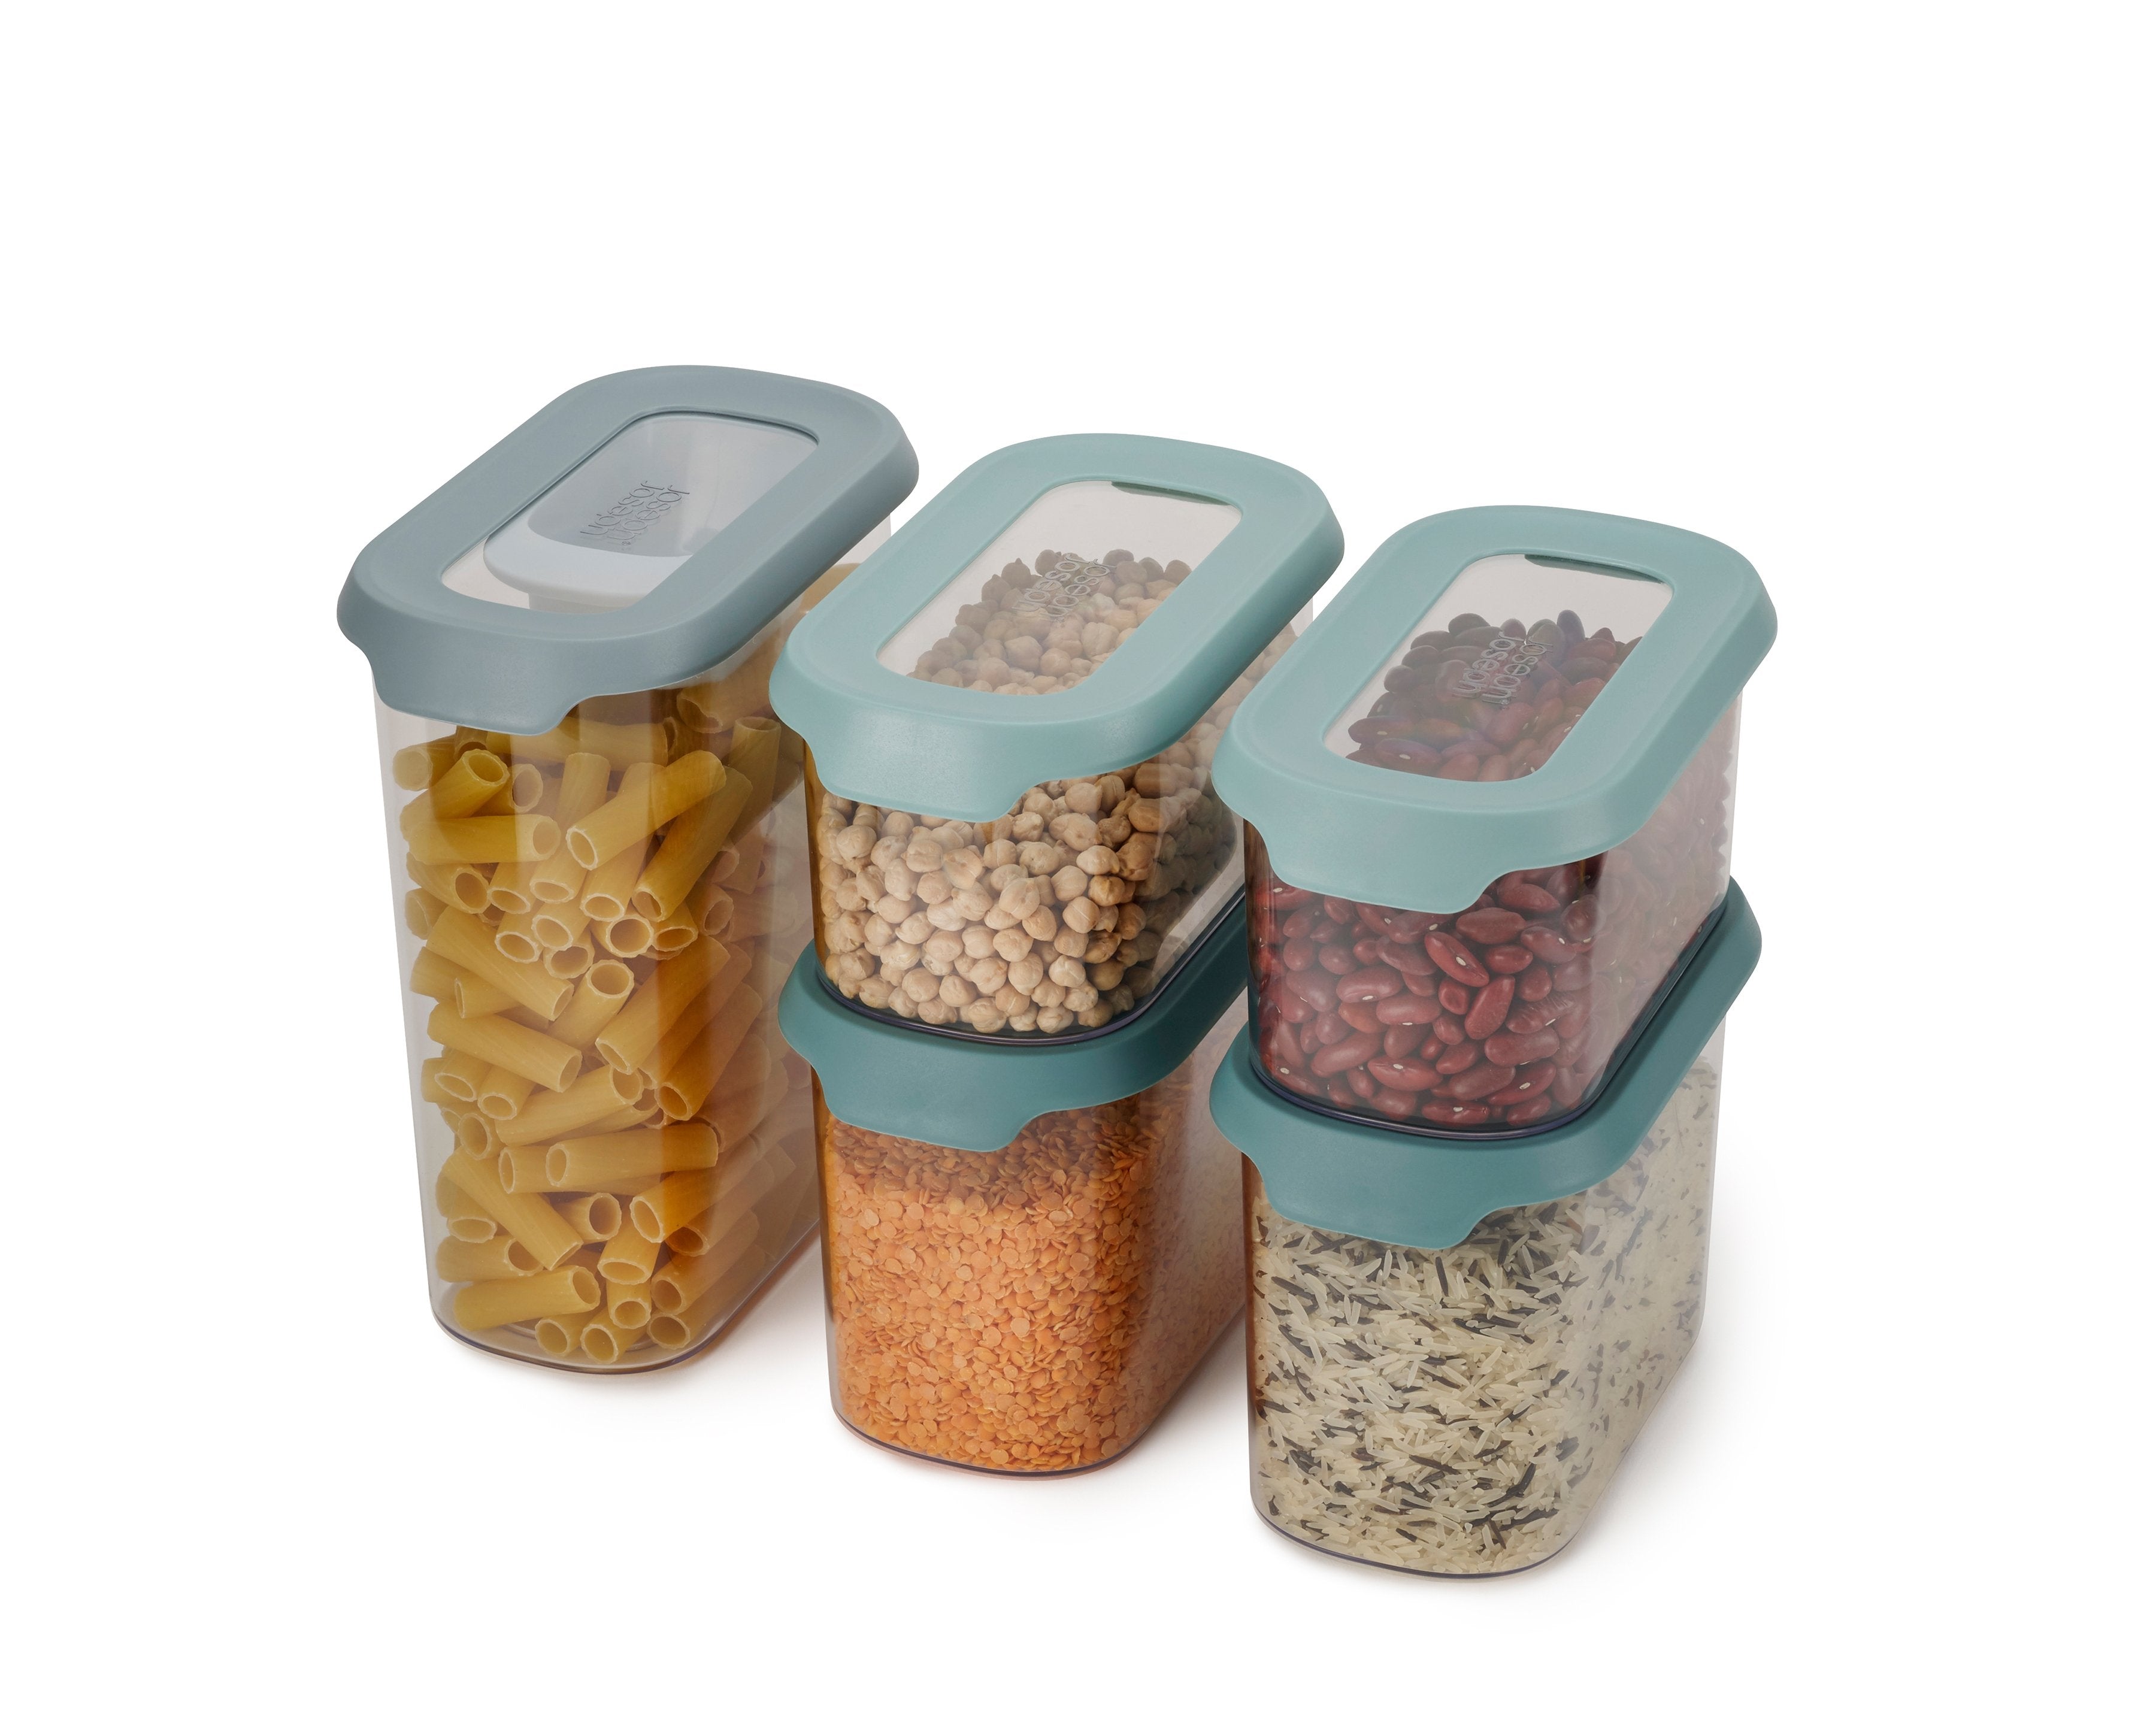 BEON.COM.AU  The stackable design of this food storage set helps make full use of space, either in your cupboard or out on a worktop.  Space-efficient, stackable design Set includes 5 plastic containers plus a handy scoop Scoop stores inside largest container Containers feature airtight lids with easy-pull t... Joseph Joseph at BEON.COM.AU